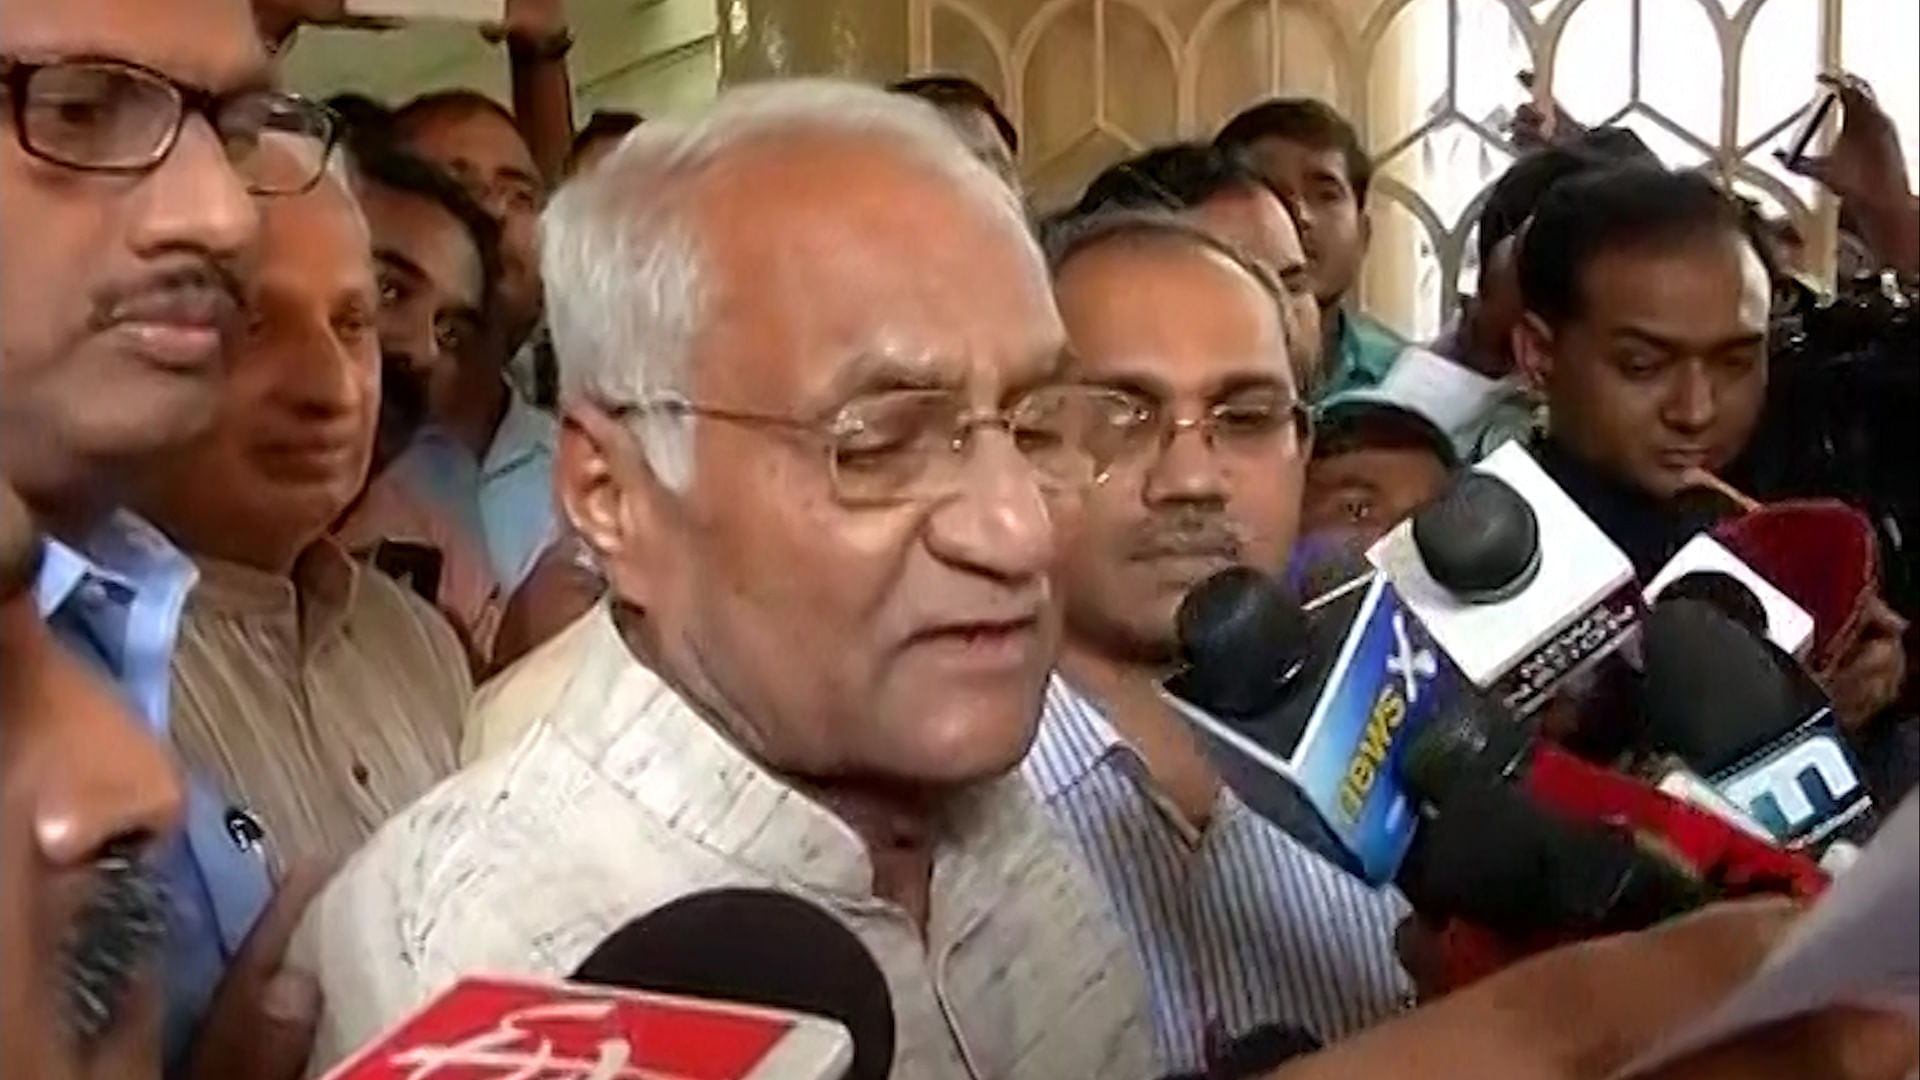 Krishnaswamy Nachimuthu, an executive committee board member speaks with the media. (Photo Courtesy: ANI screengrab)